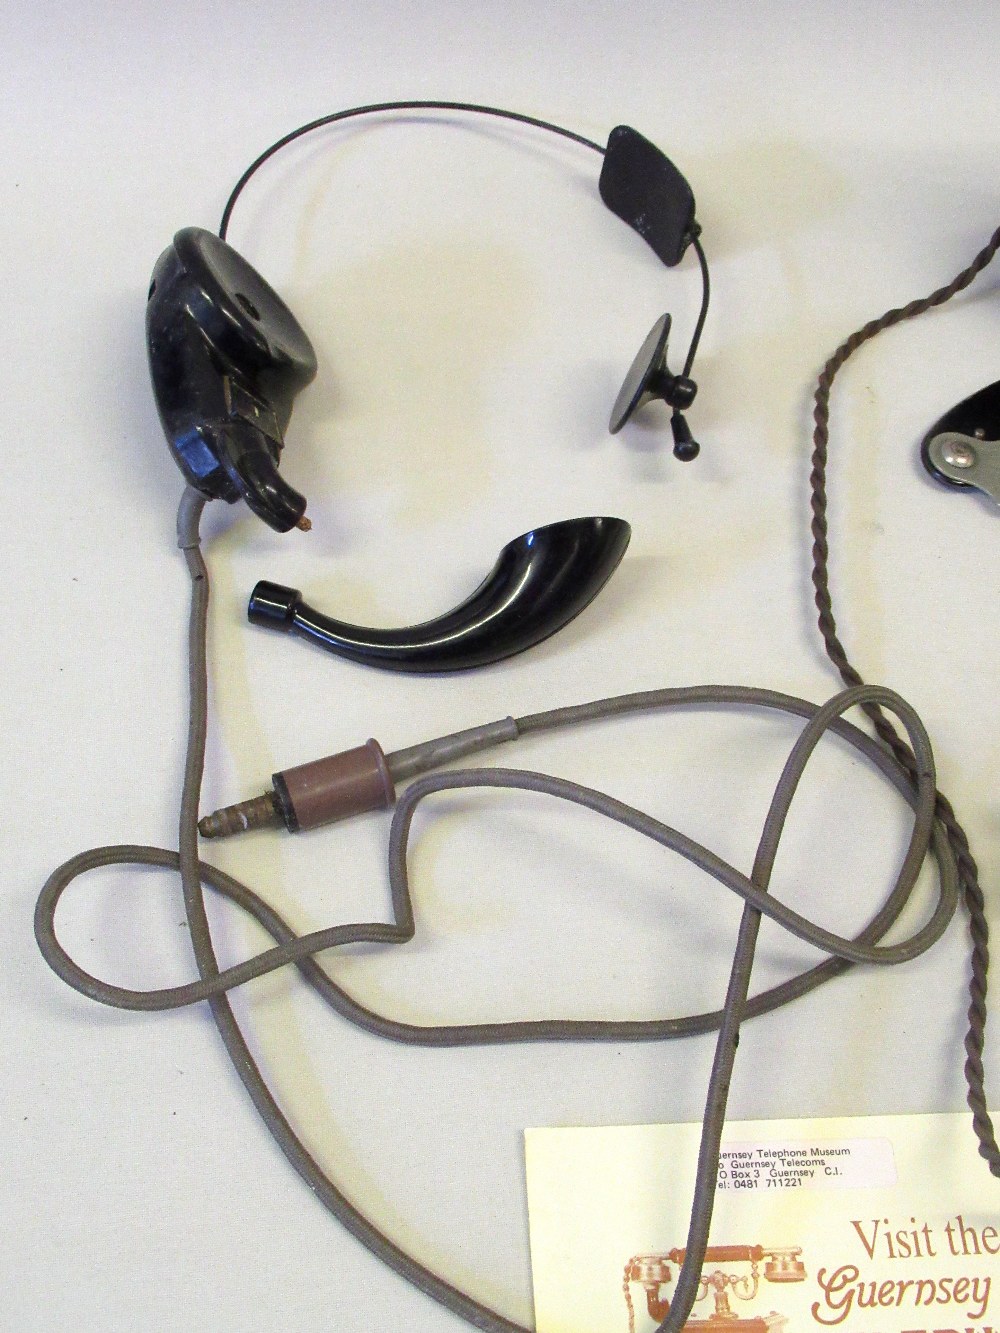 POST OFFICE TELEPHONES BLACK BAKELITE OPERATOR'S HAND SET WITH A PRESS BUTTON, STANDING MOUTHPIECE - Image 4 of 7